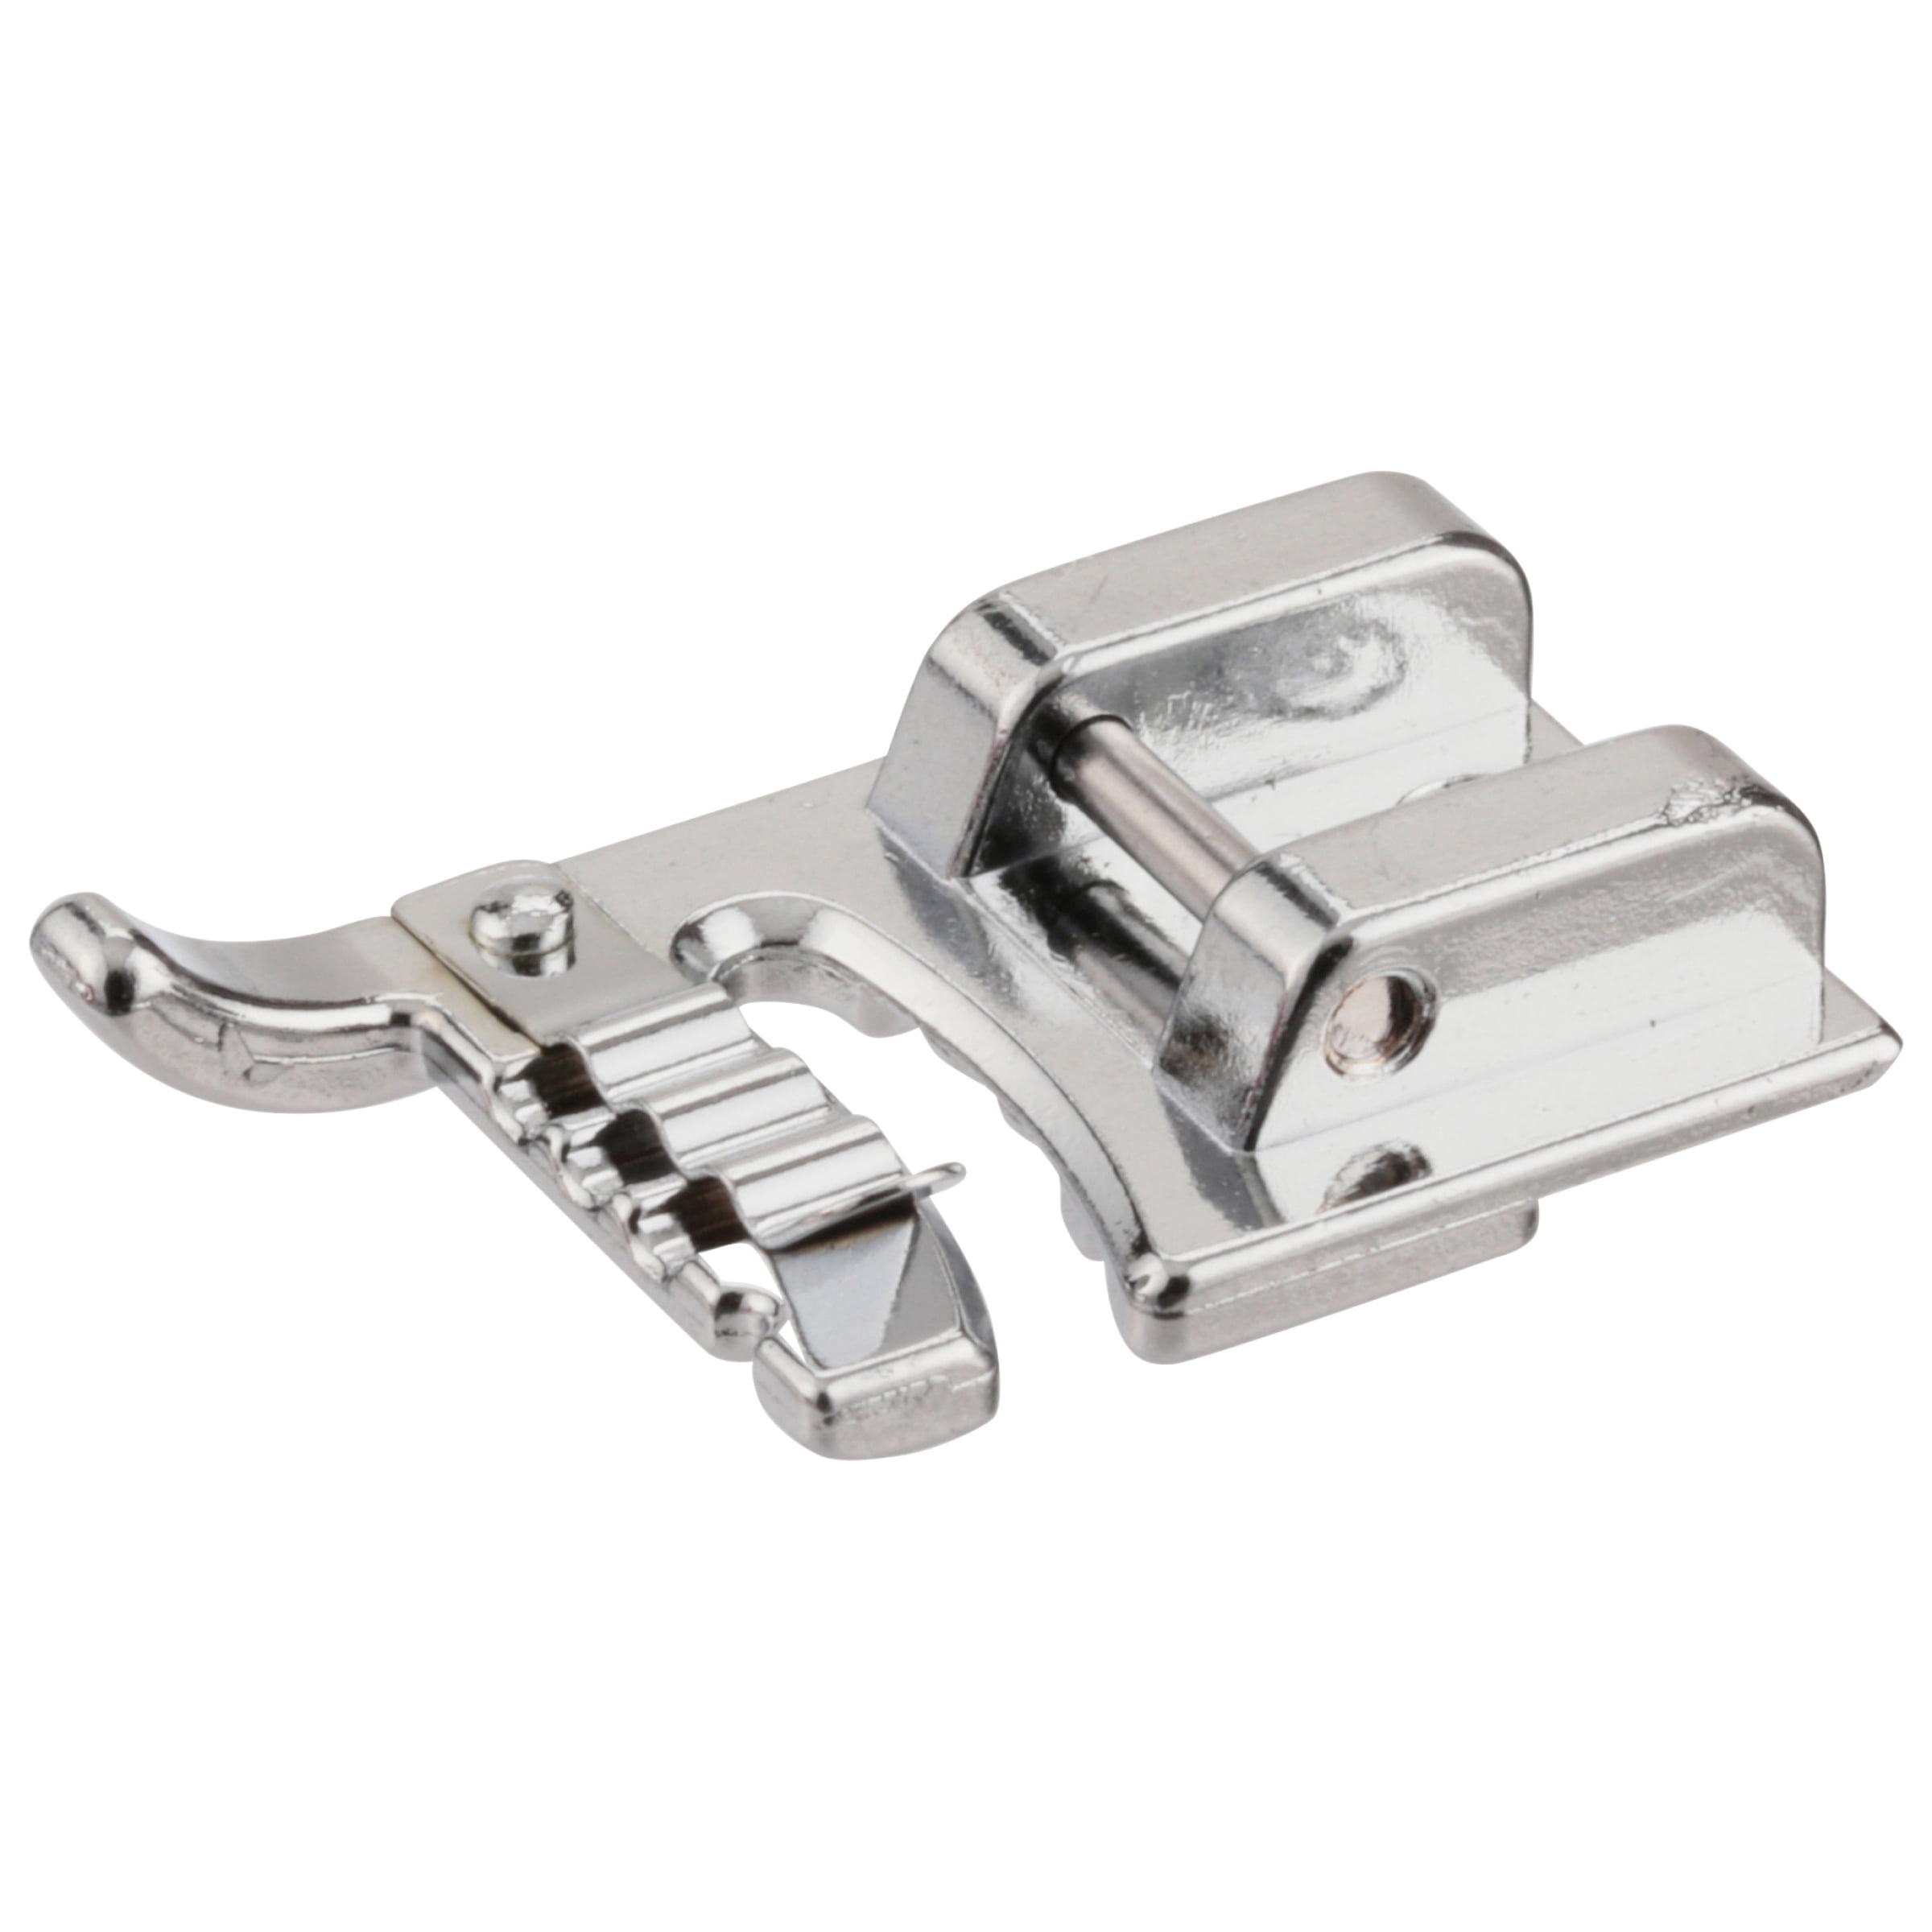 Singer Cording Snap-On Presser Foot for Low-Shank Sewing Machines